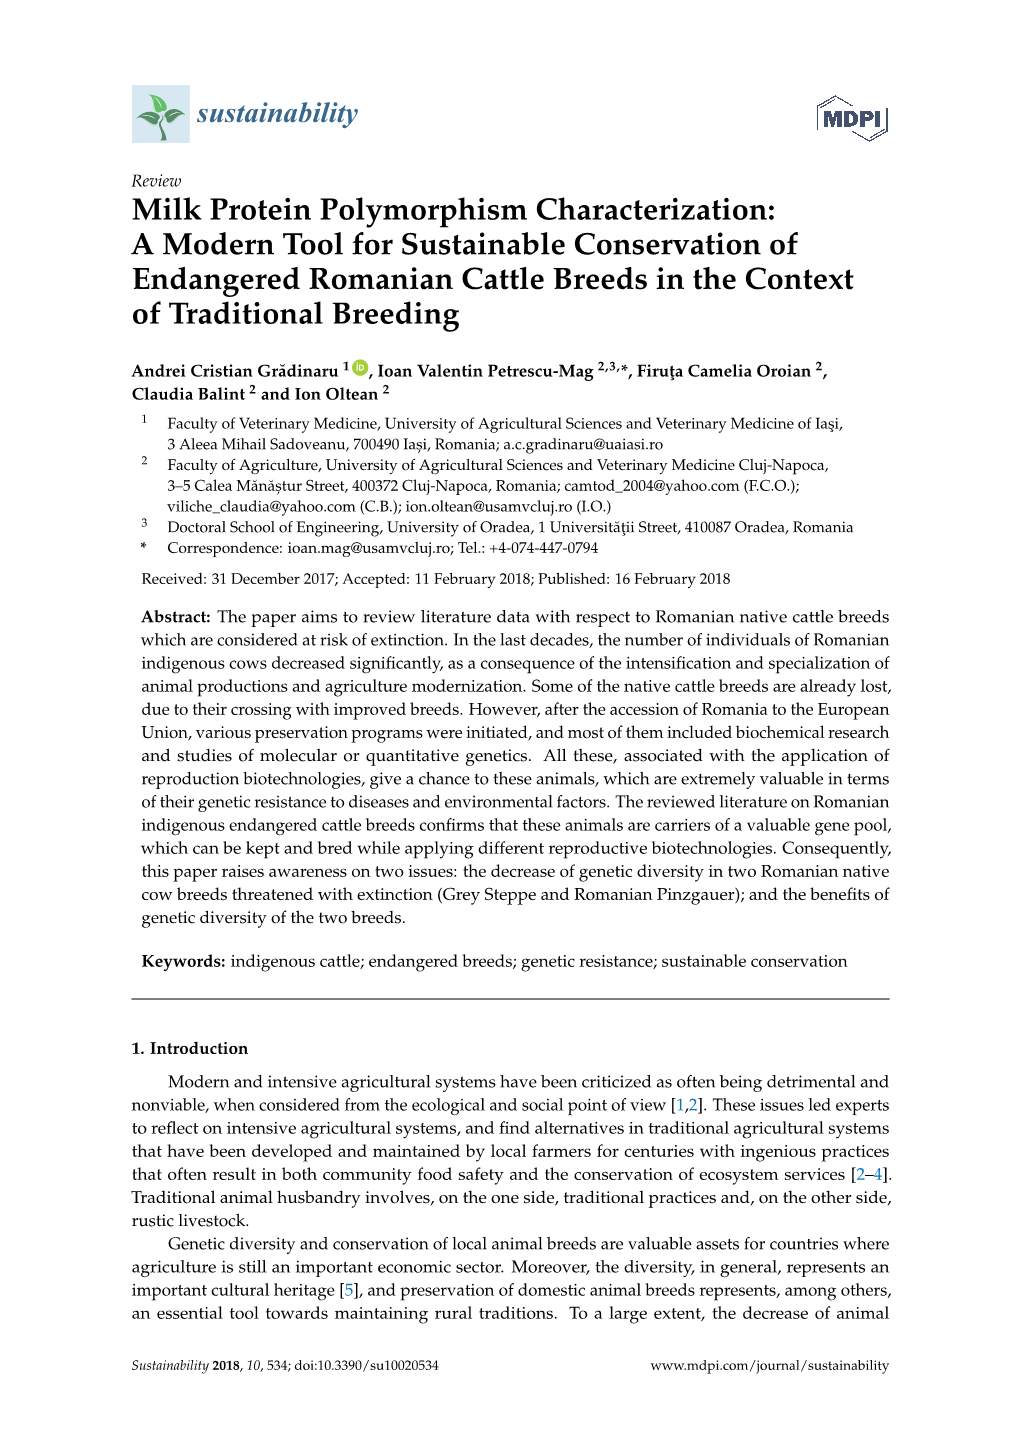 Milk Protein Polymorphism Characterization: a Modern Tool for Sustainable Conservation of Endangered Romanian Cattle Breeds in the Context of Traditional Breeding